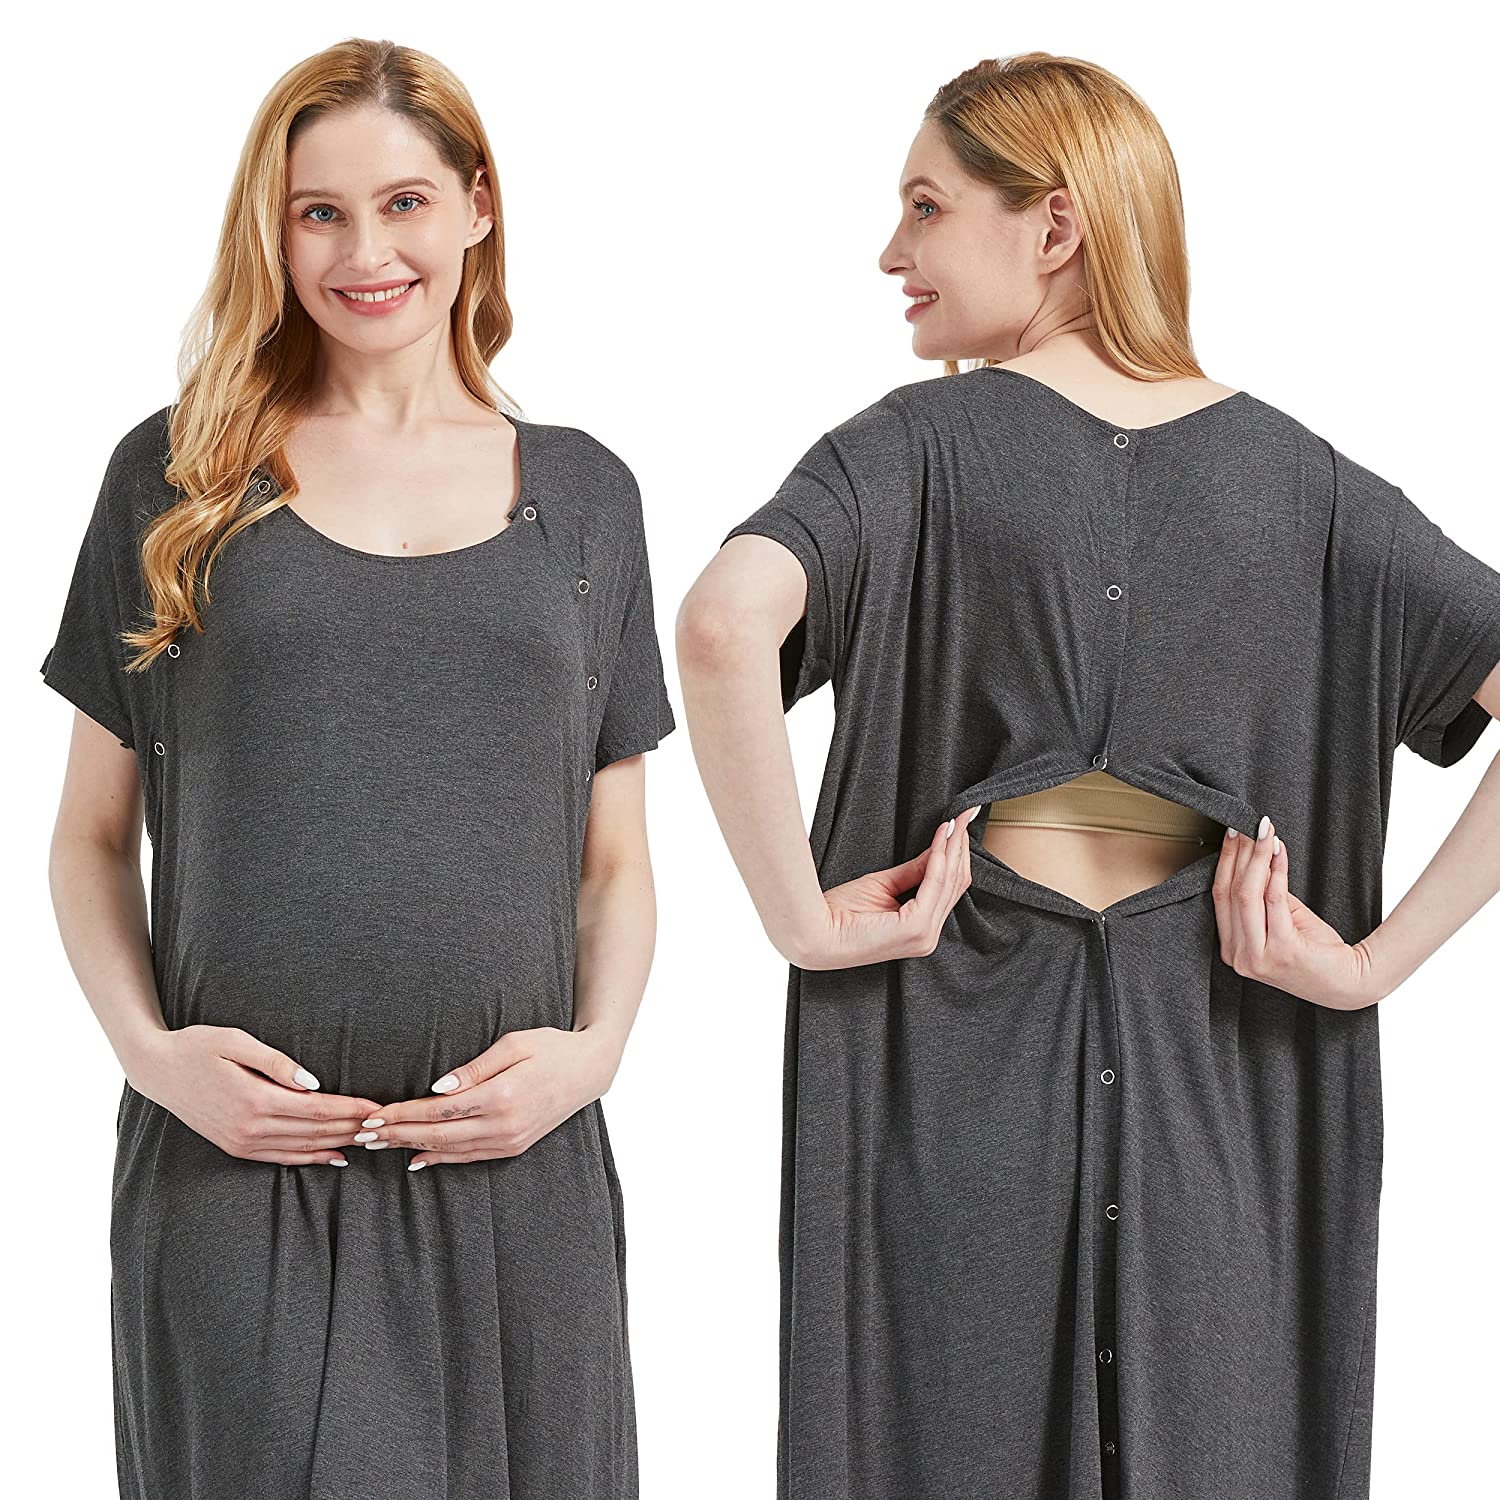 Top 3 Best Maternity Hospital Gowns - Classy Mommy | Hospital gowns  maternity, Hospital gown, Maternity hospital